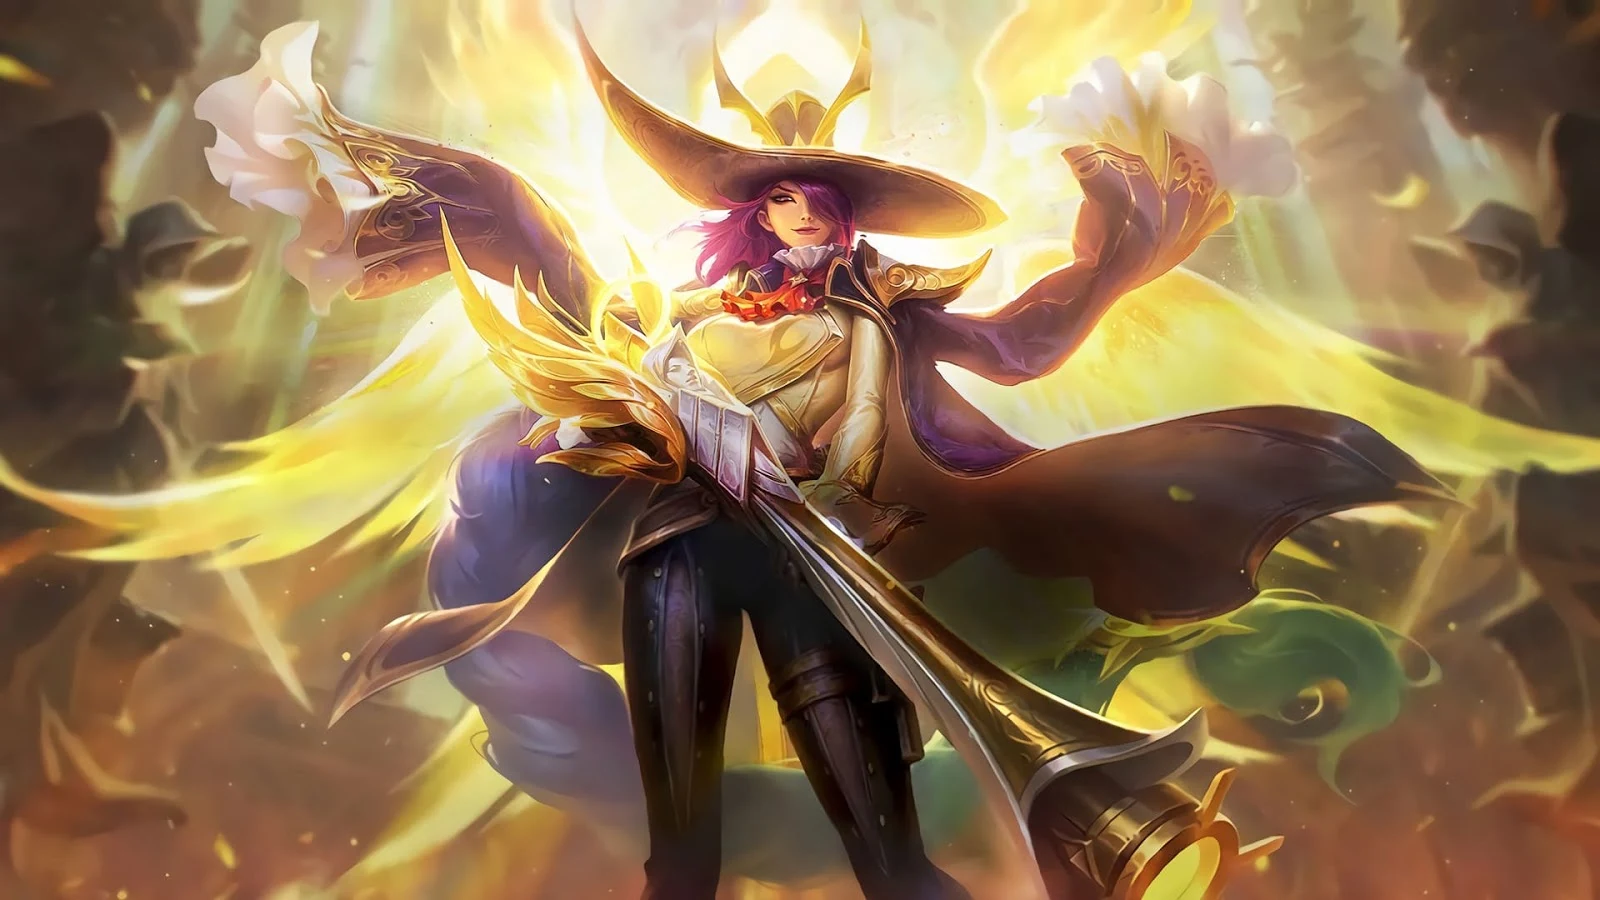 Photo#79 10+ Wallpaper Lesley Mobile Legends (ML) Full HD for PC, Android & iOS